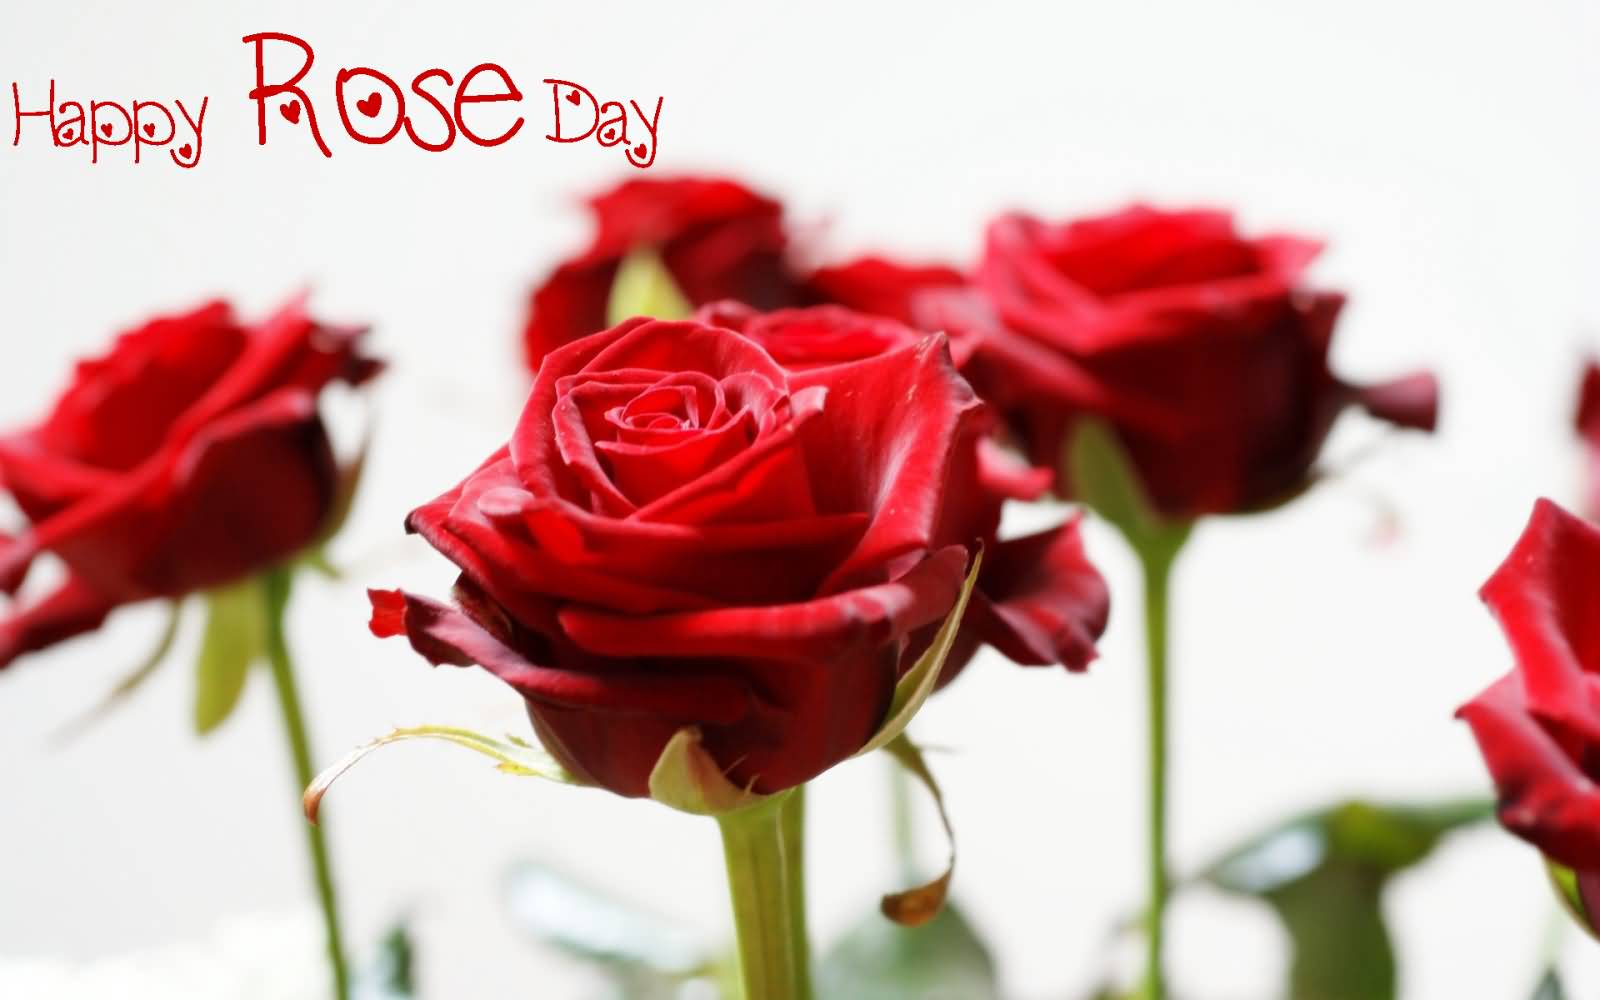 60 Adorable Rose Day 2017 Greeting Pictures And Images1600 x 1000